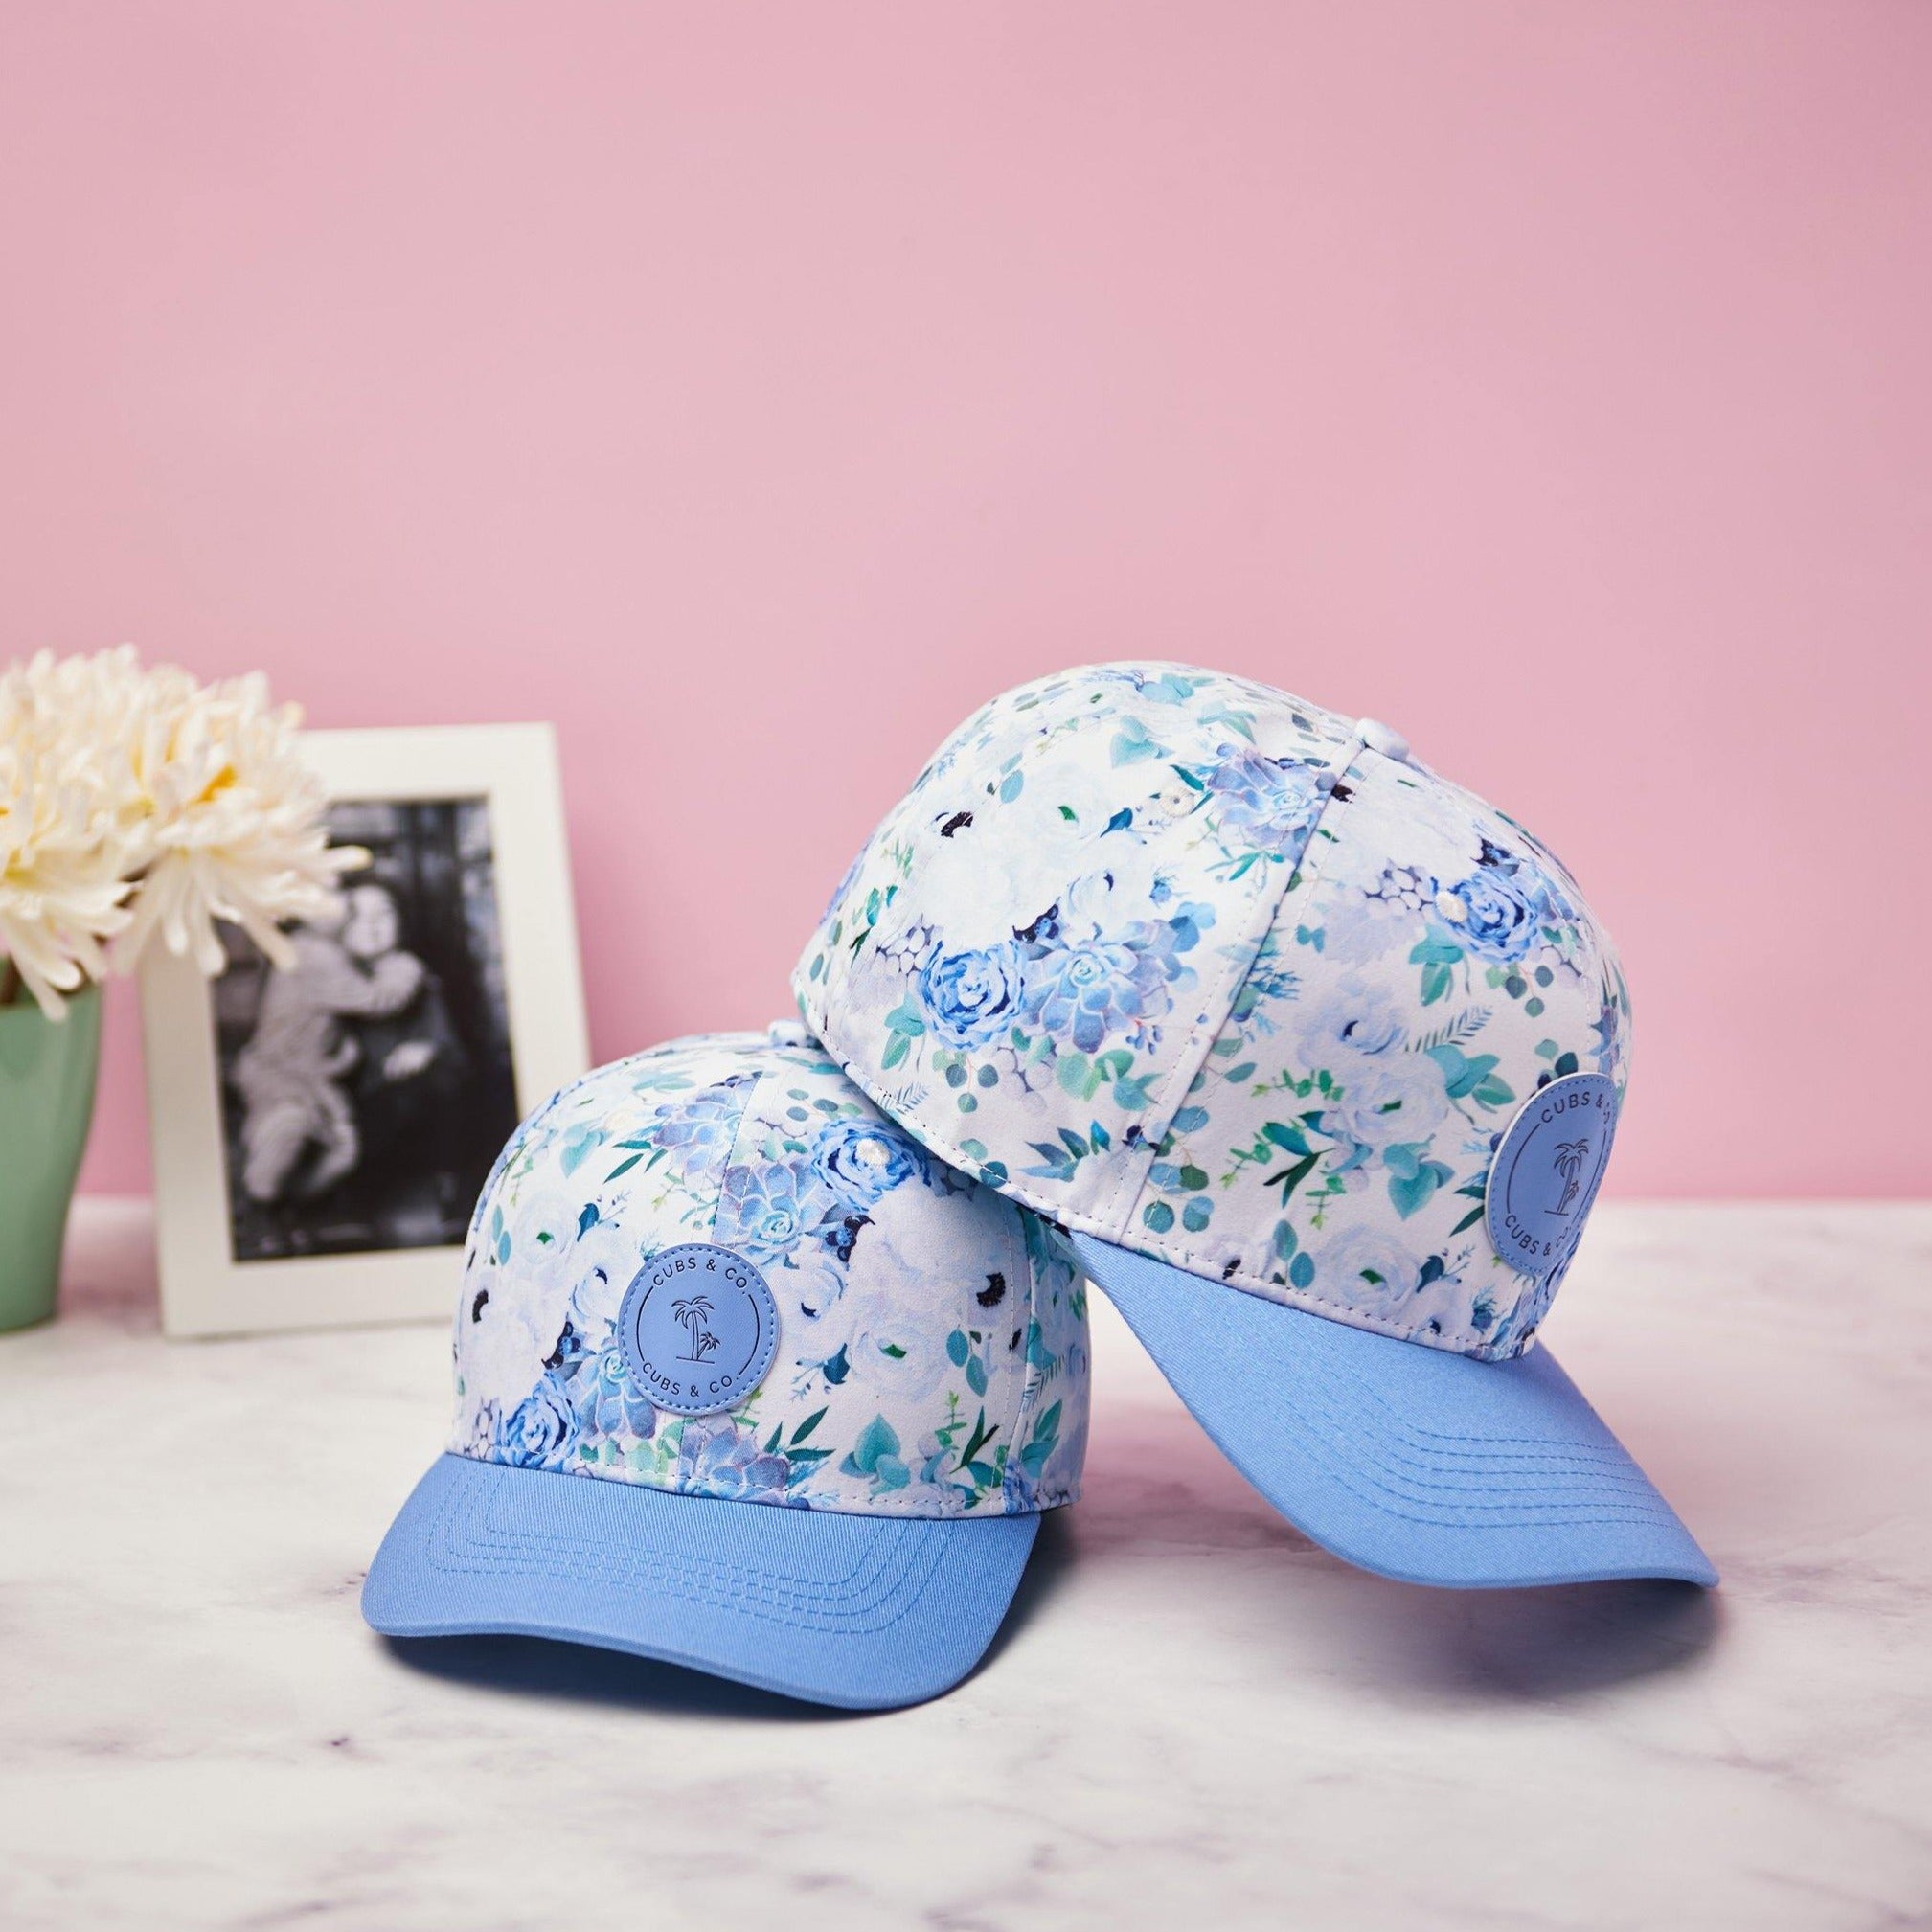 Mum and Daughter Matching Hats, Floral Hats | Cubs & Co. Sydney, Australia